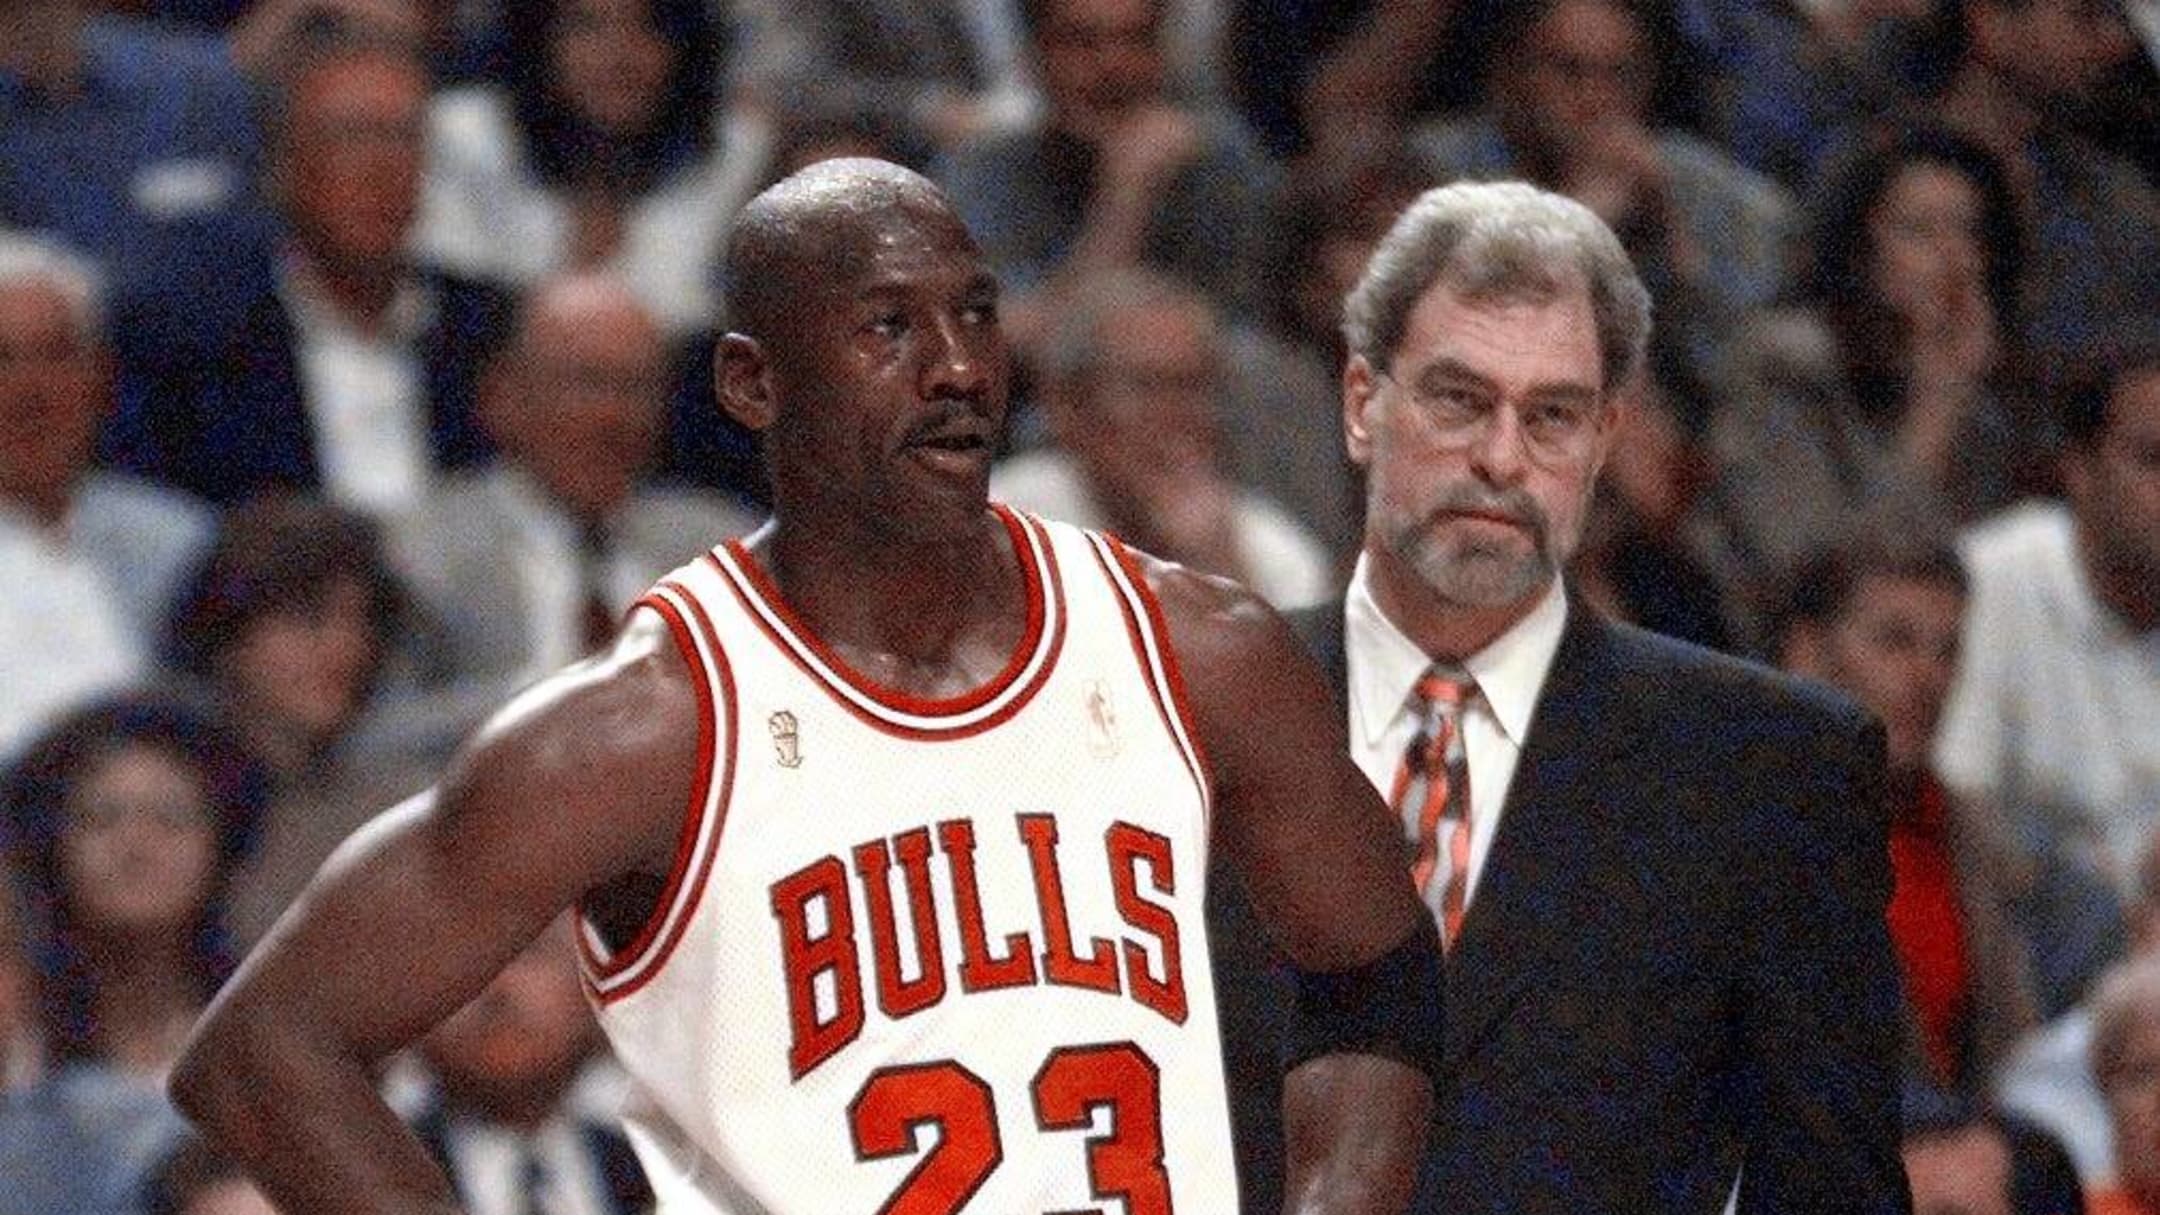 Why did Michael Jordan switch his jersey number from 23 to 45 when